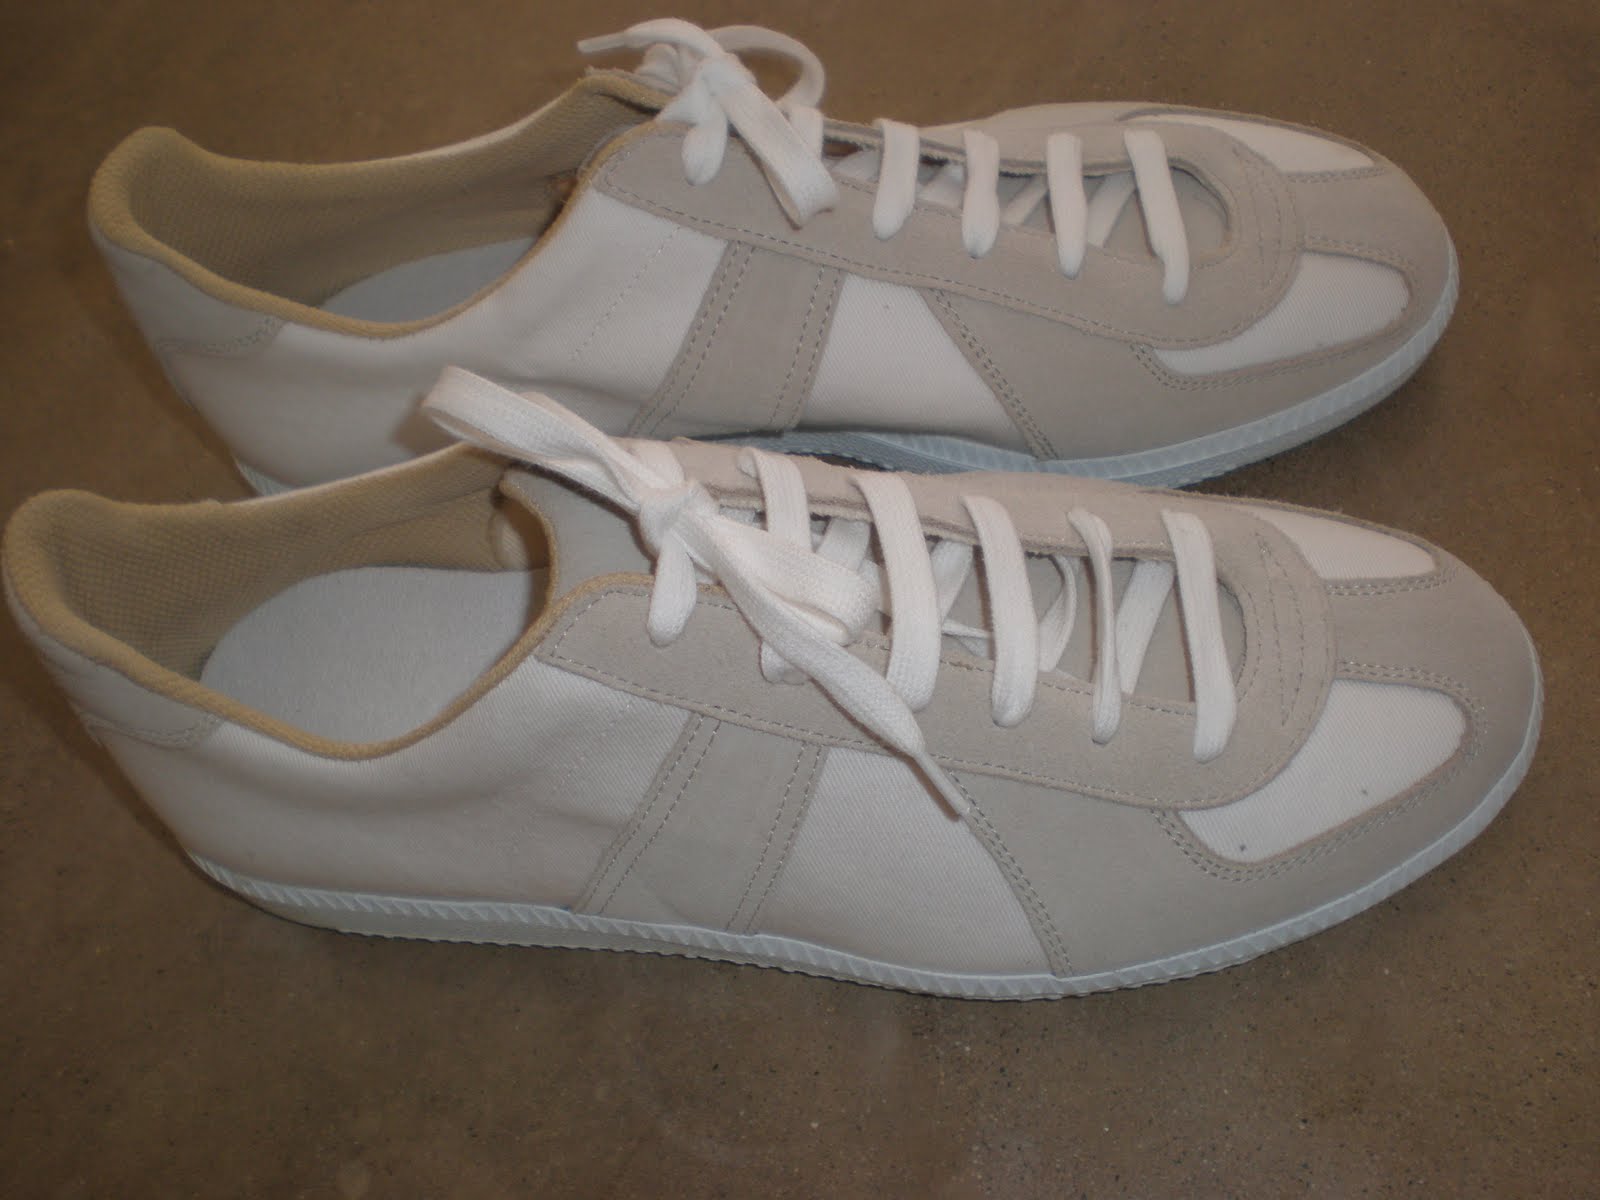 Jeremy Stanford / Tezla Shoes: BW-Sport German Army trainers in canvas